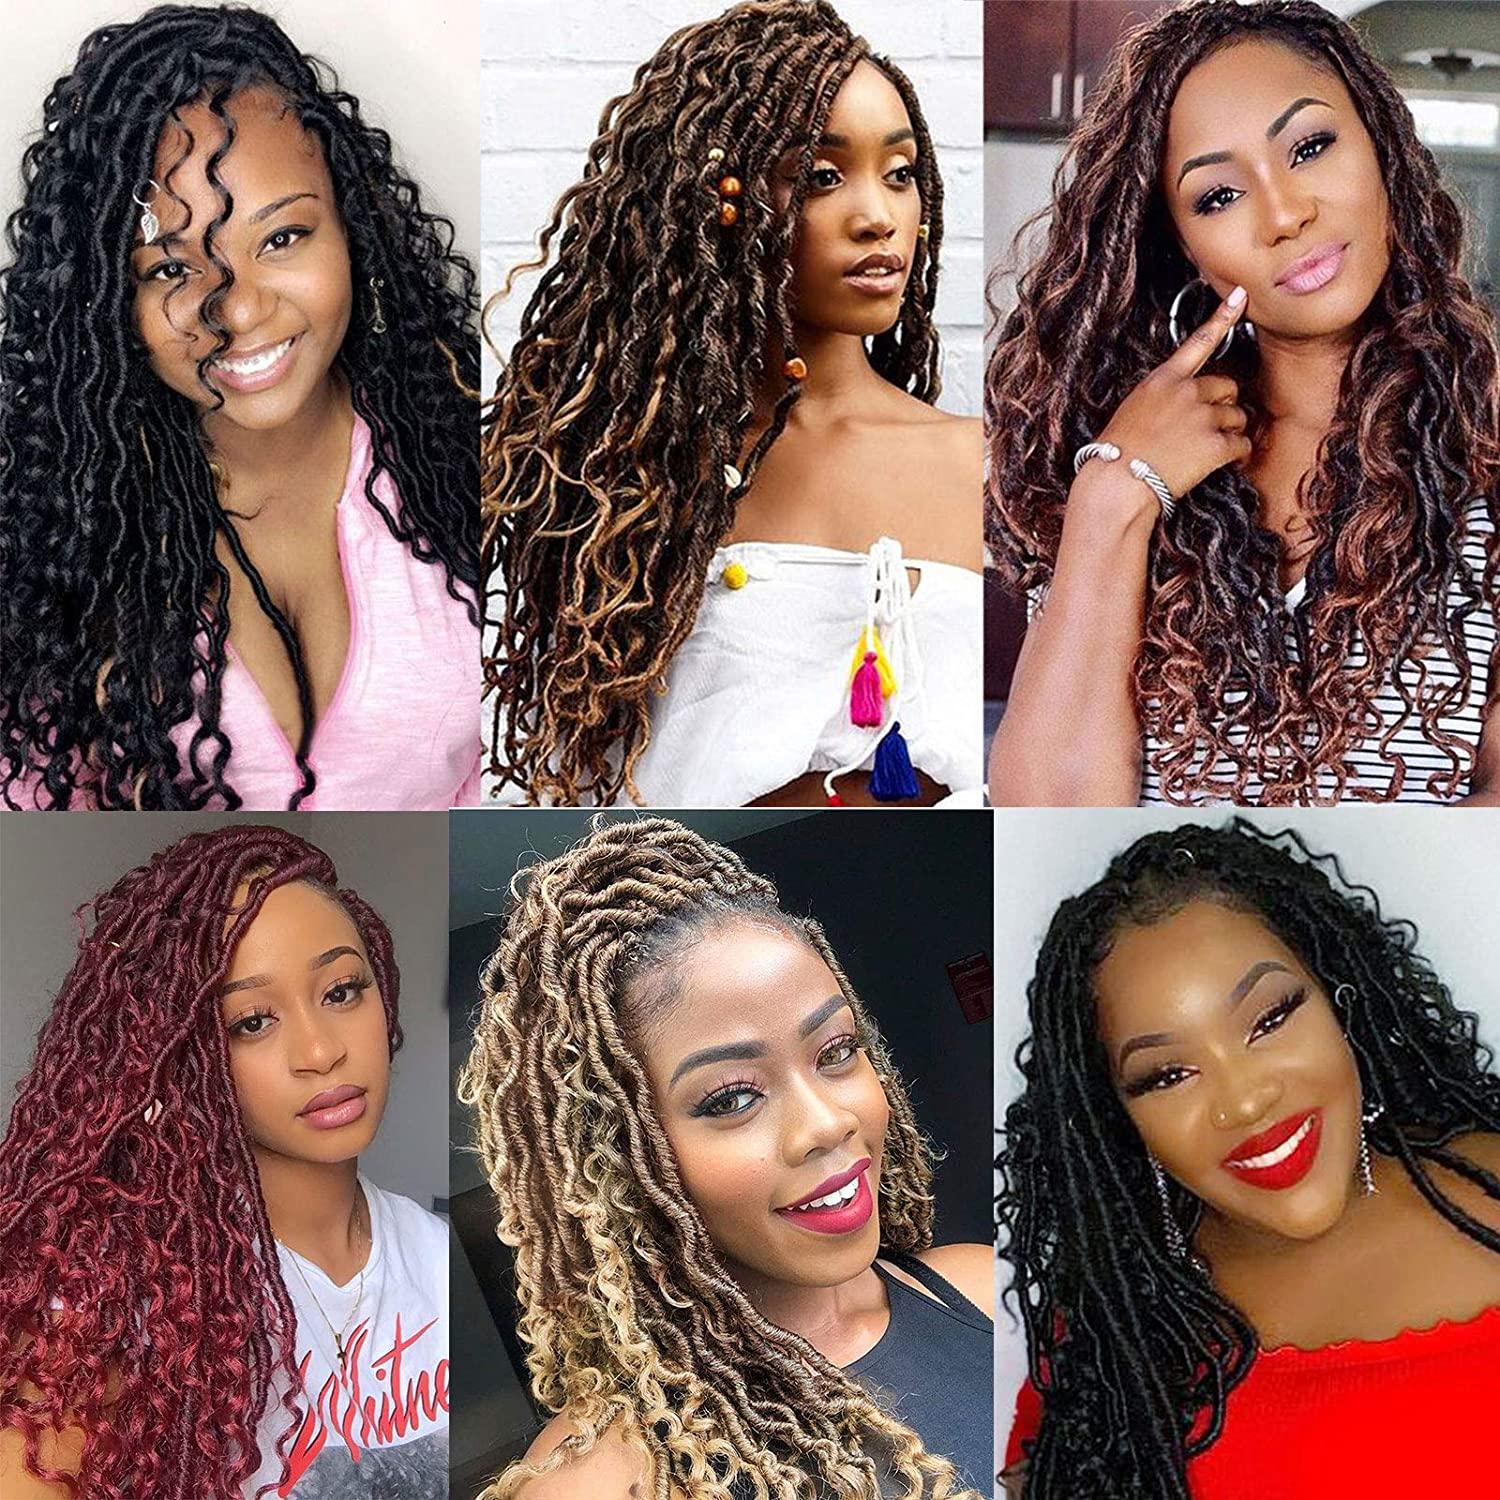 6 Packs Boho Goddess Locs Crochet Hair 18 Inch River Locs Goddess Faux Locs  Crochet Hair Wavy Crochet With Curly Hair In Middle And Ends Boho Faux Locs  Synthetic Hair Extension (18inch,T27)